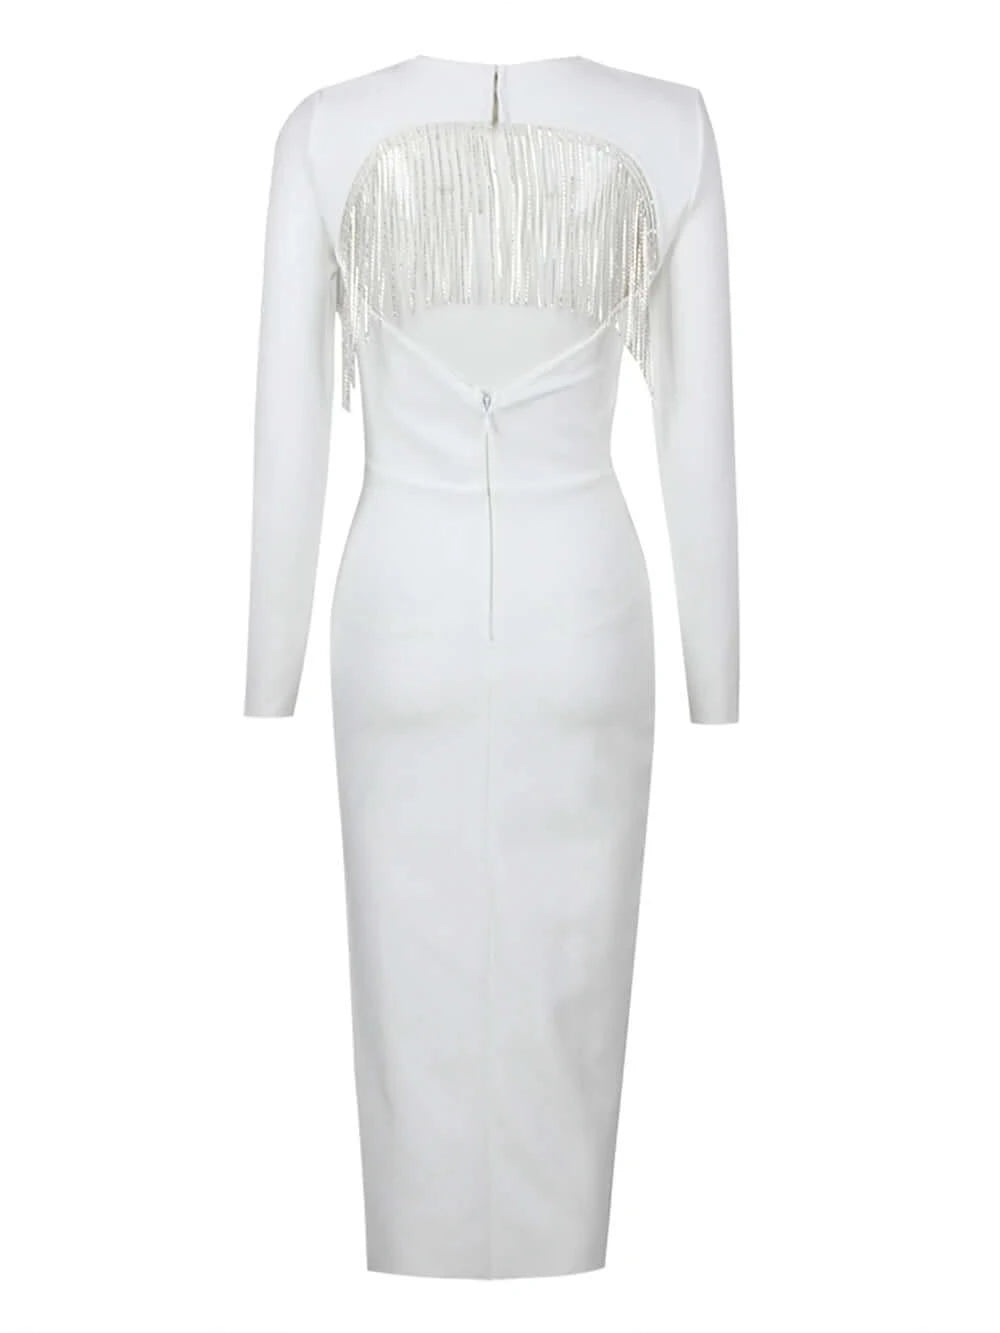 White Long Sleeves Bandage Dress With Crystal Tassels